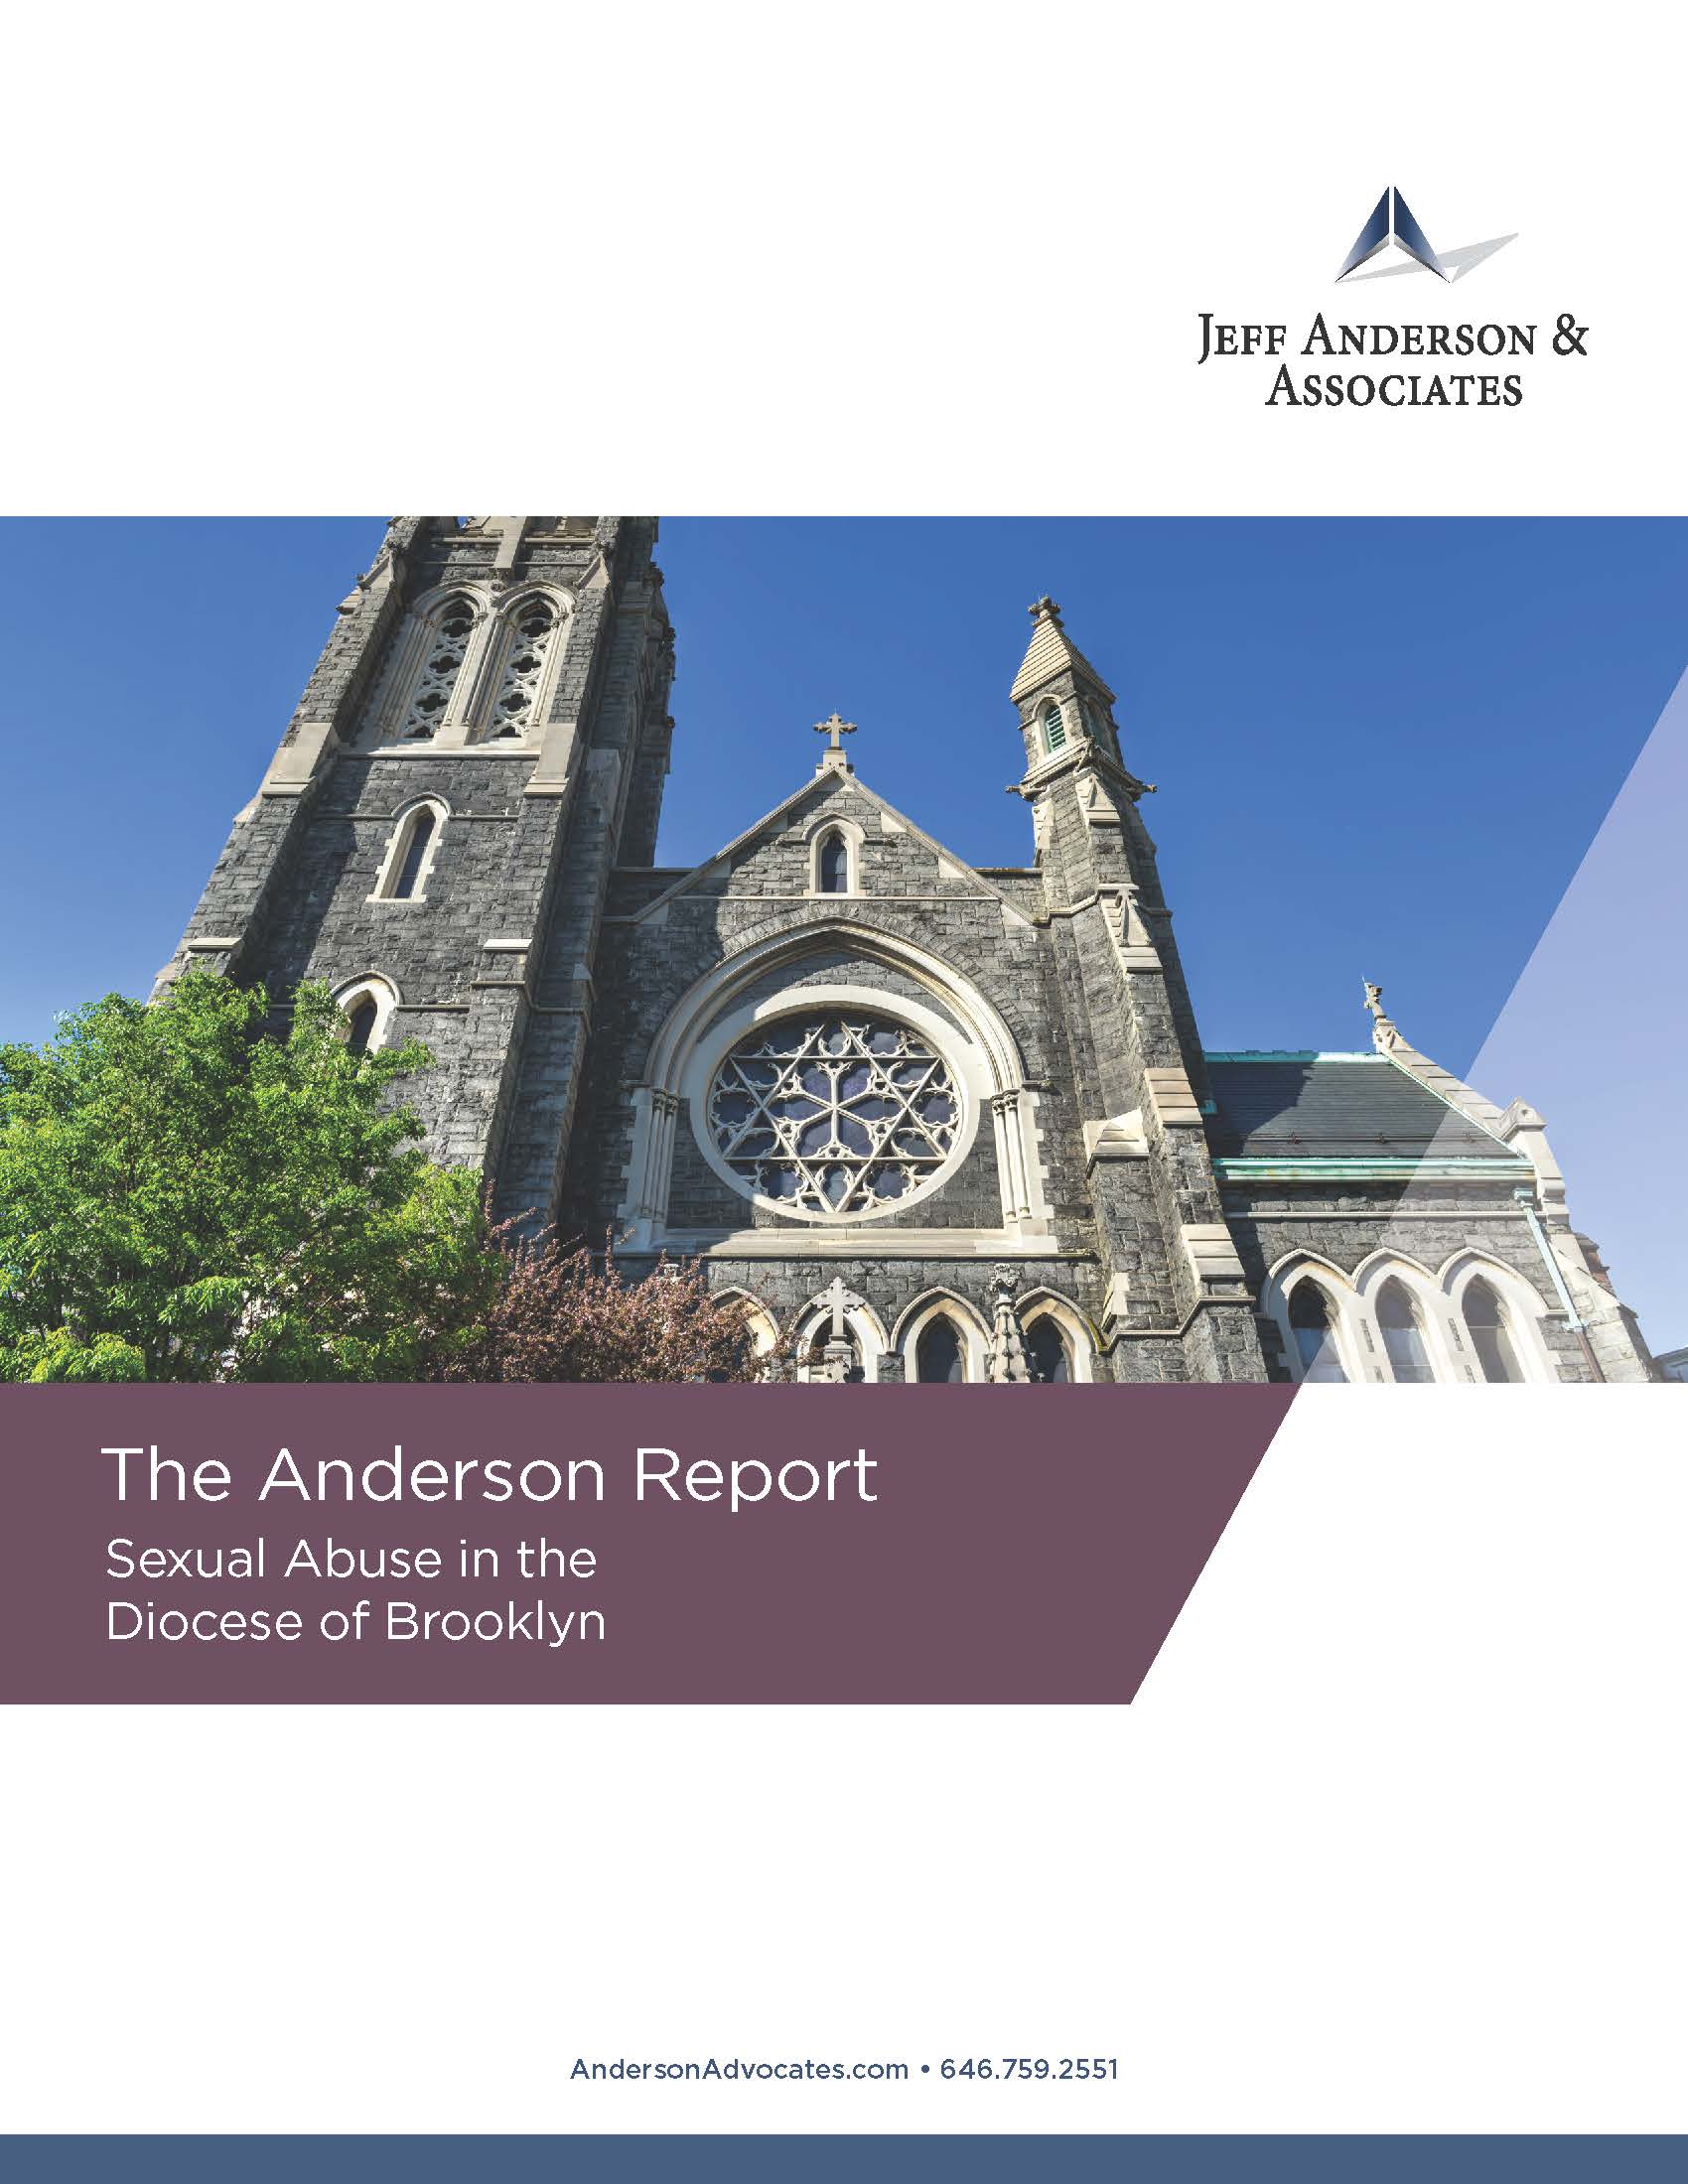 The Anderson Report image